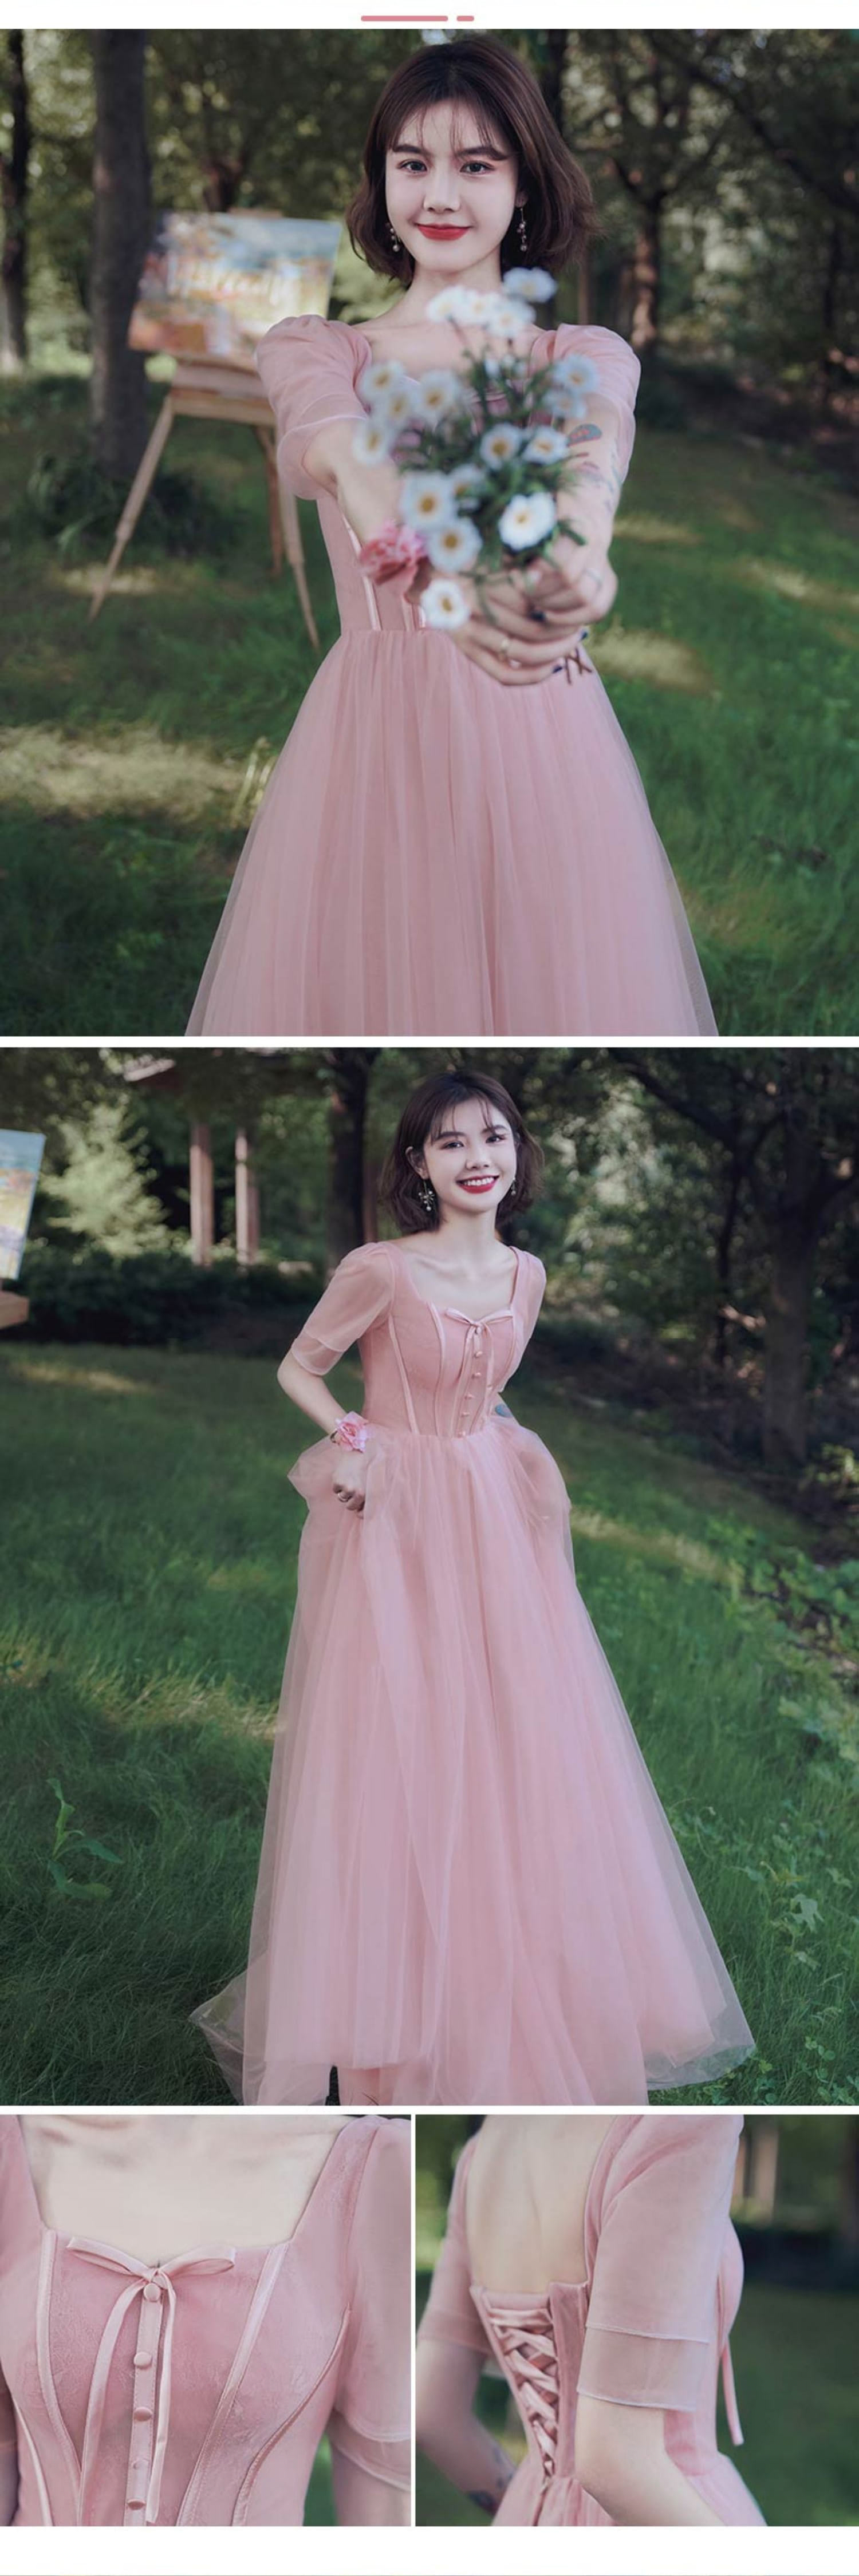 Feminine-Sweet-Pink-Tulle-Bridesmaid-Dress-Prom-Party-Ball-Gown20